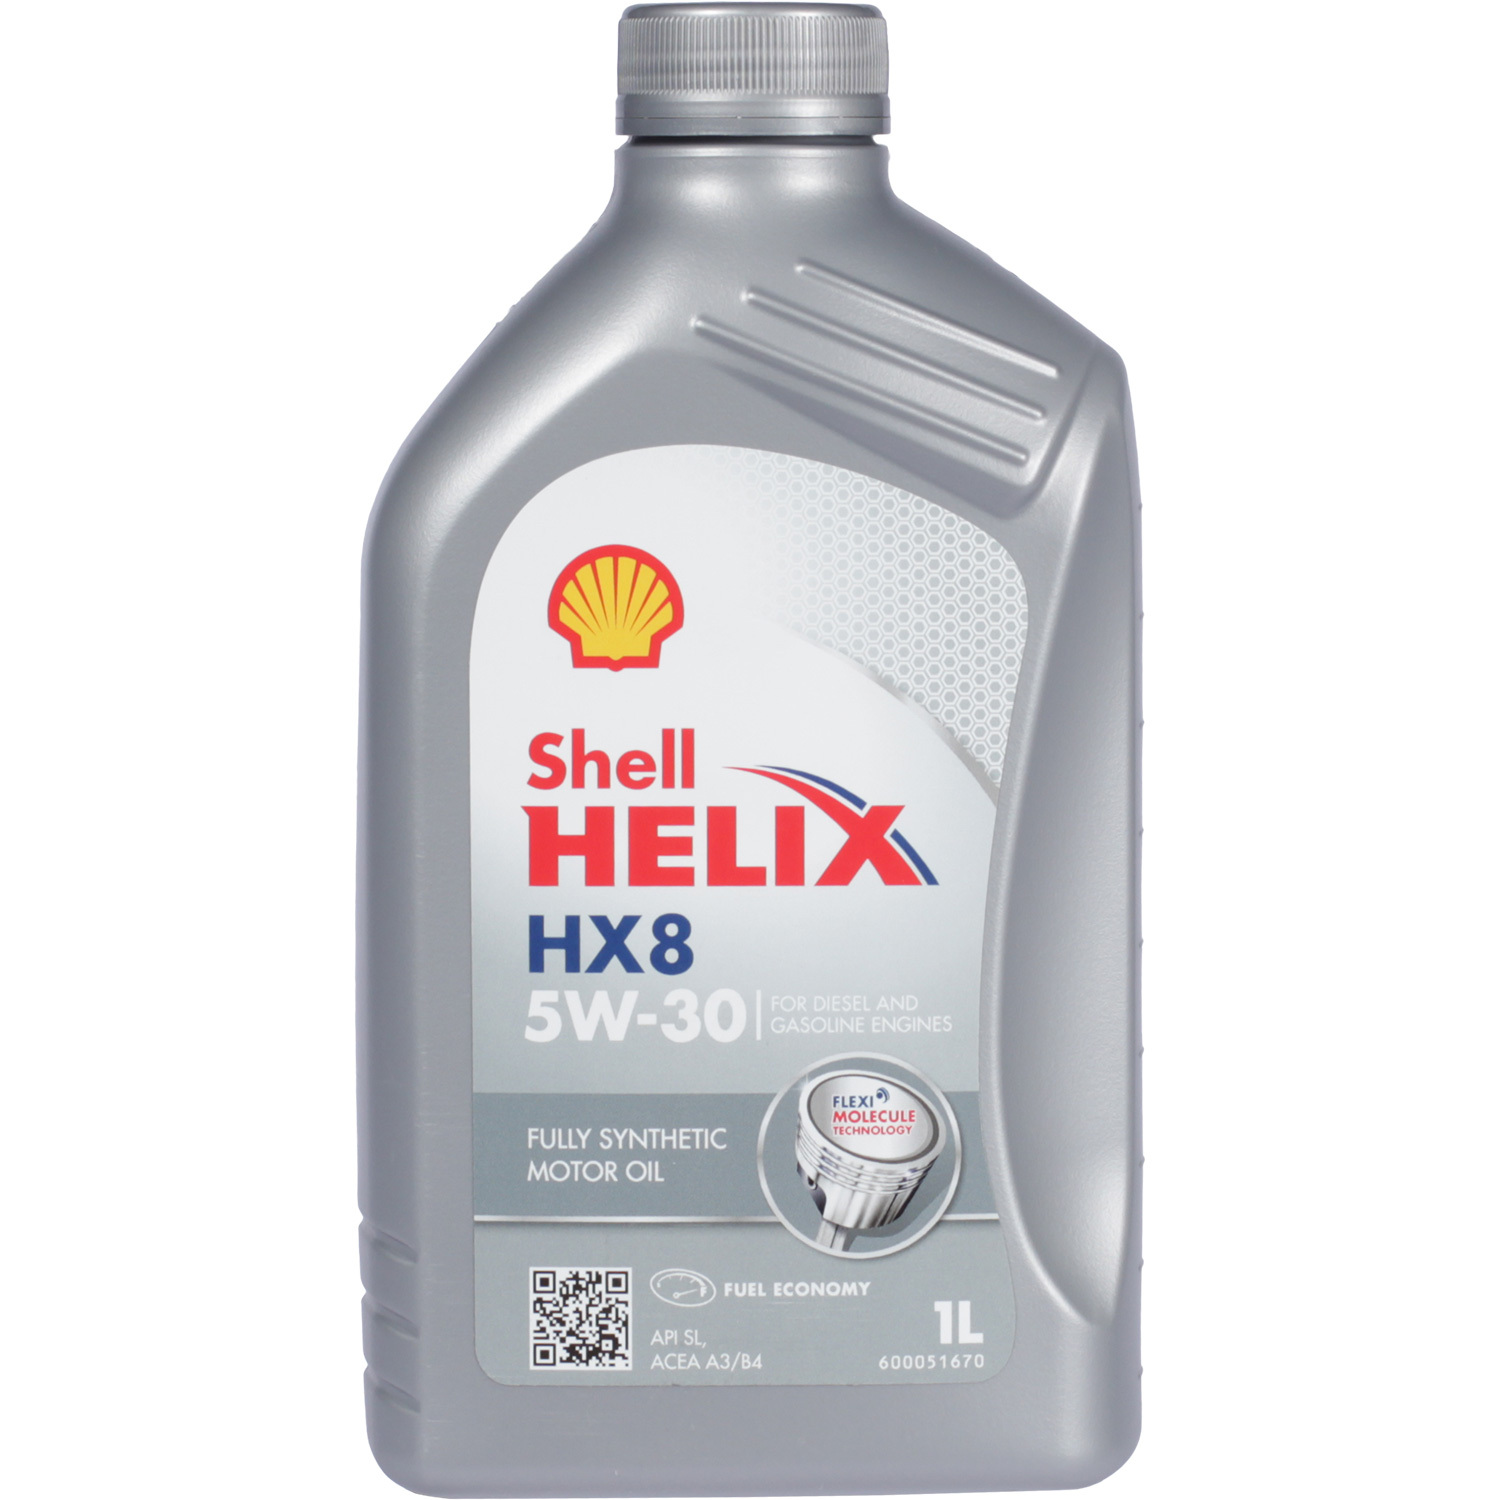 Shell Моторное масло Shell Helix HX8 5W-30, 1 л масло моторное shell helix ultra 5w 40 1 л